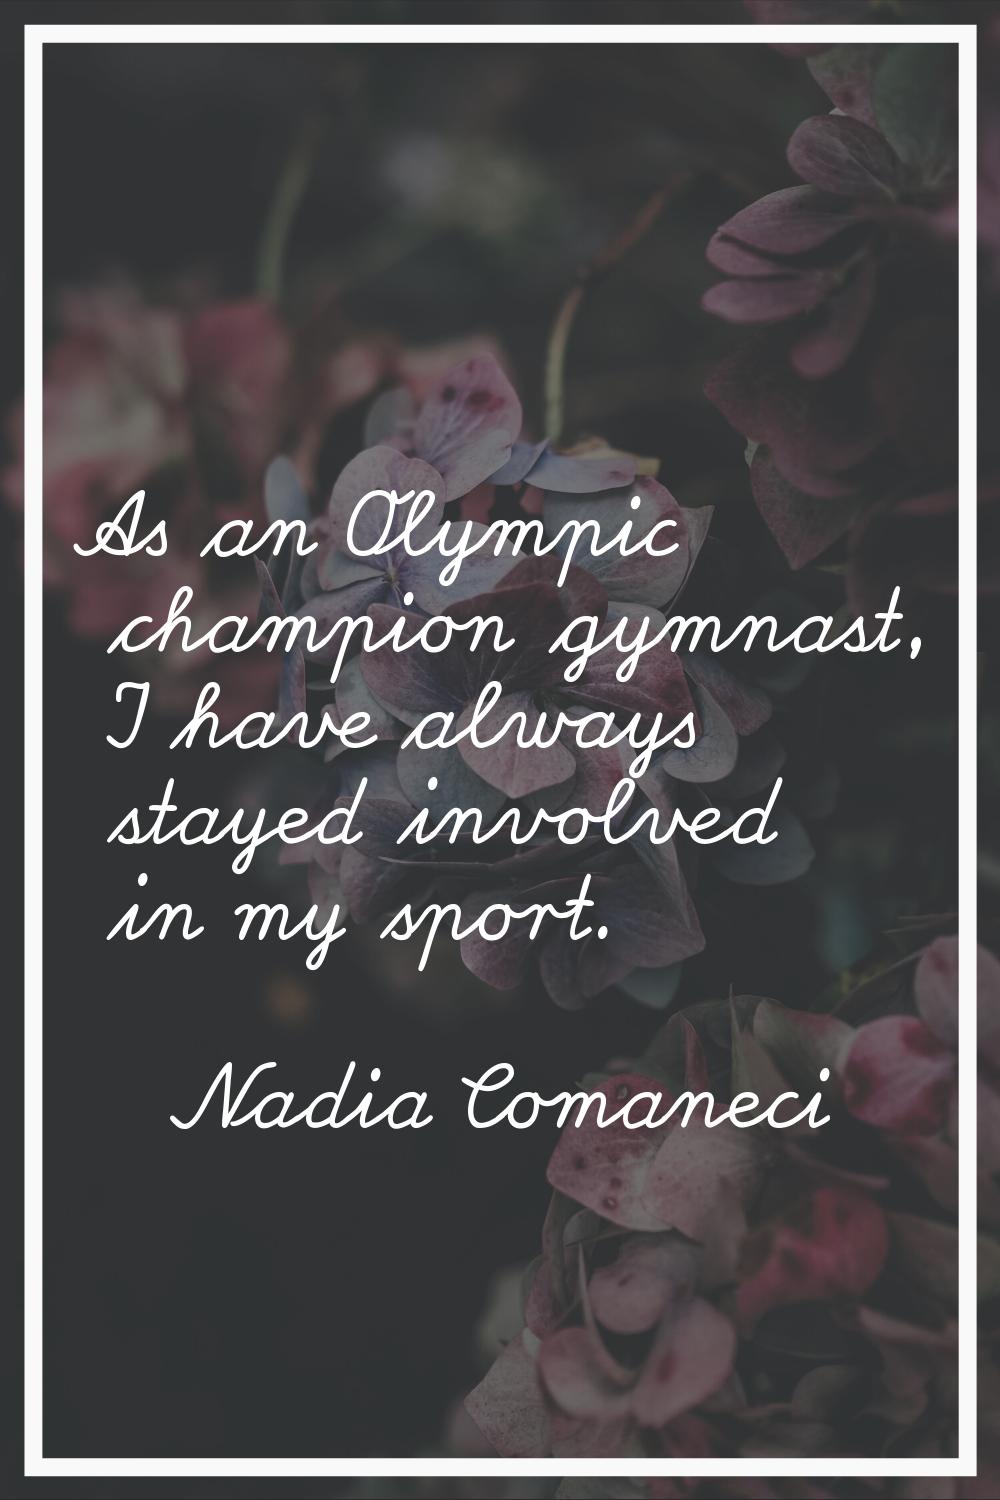 As an Olympic champion gymnast, I have always stayed involved in my sport.